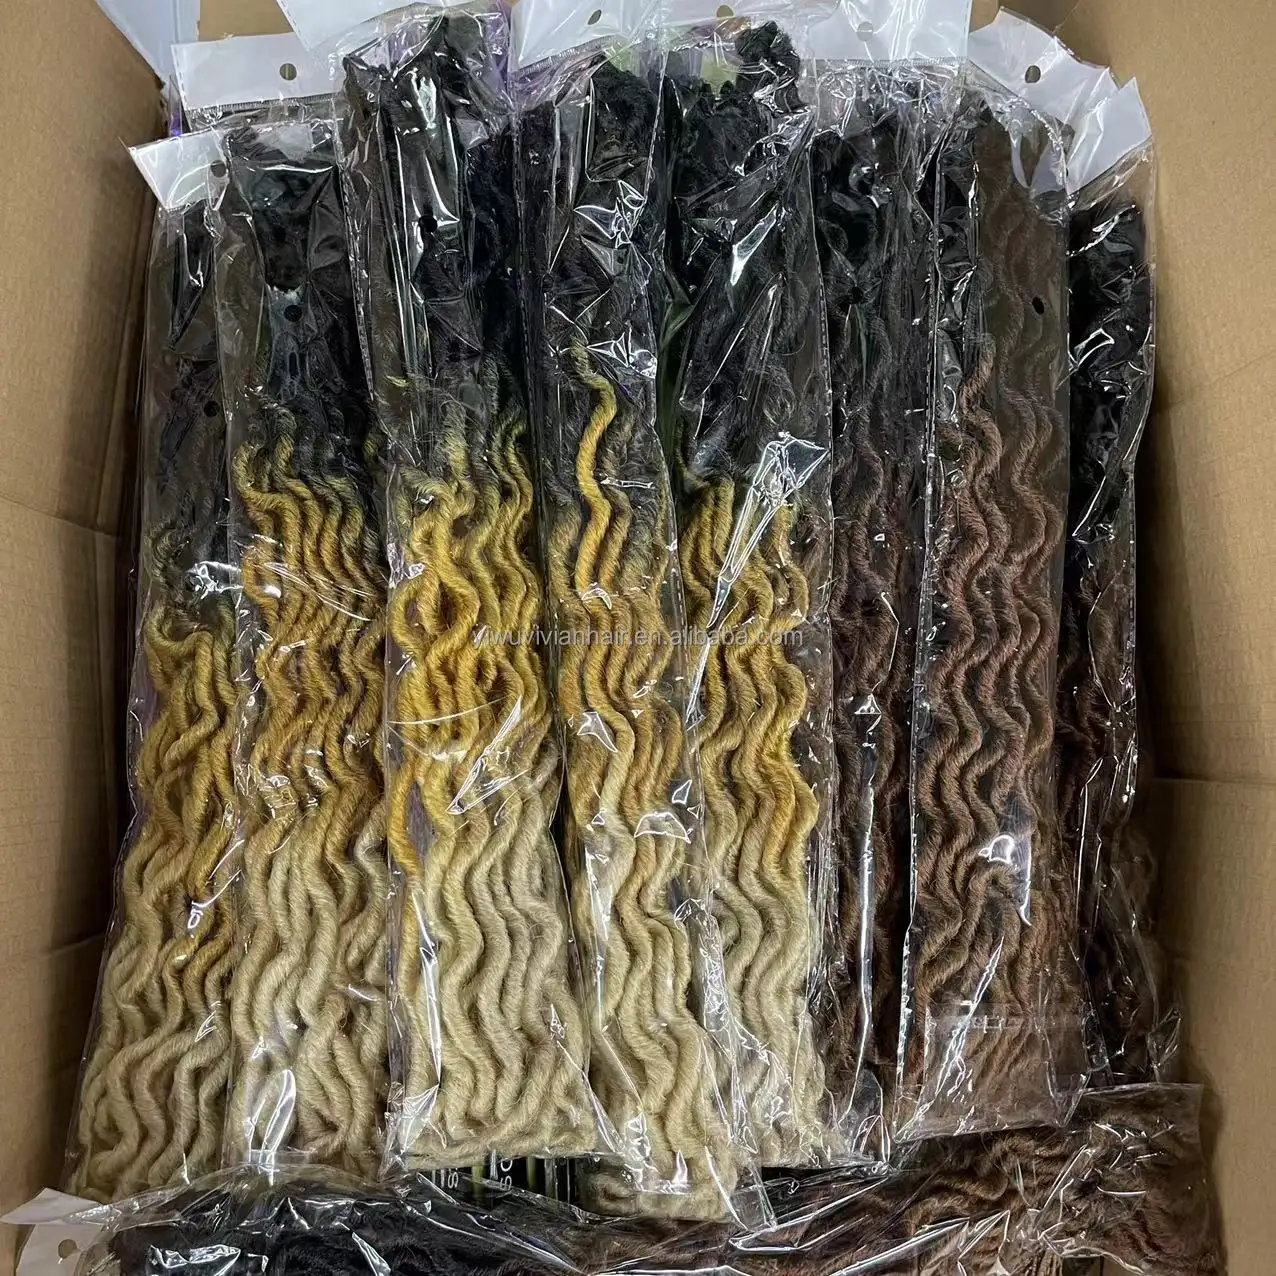 Wholesale 12inch Goddess Gypsy Locs Crochet Hair Curly Faux Locs African Dreadlocs Hair Extensions Synthetic Hair